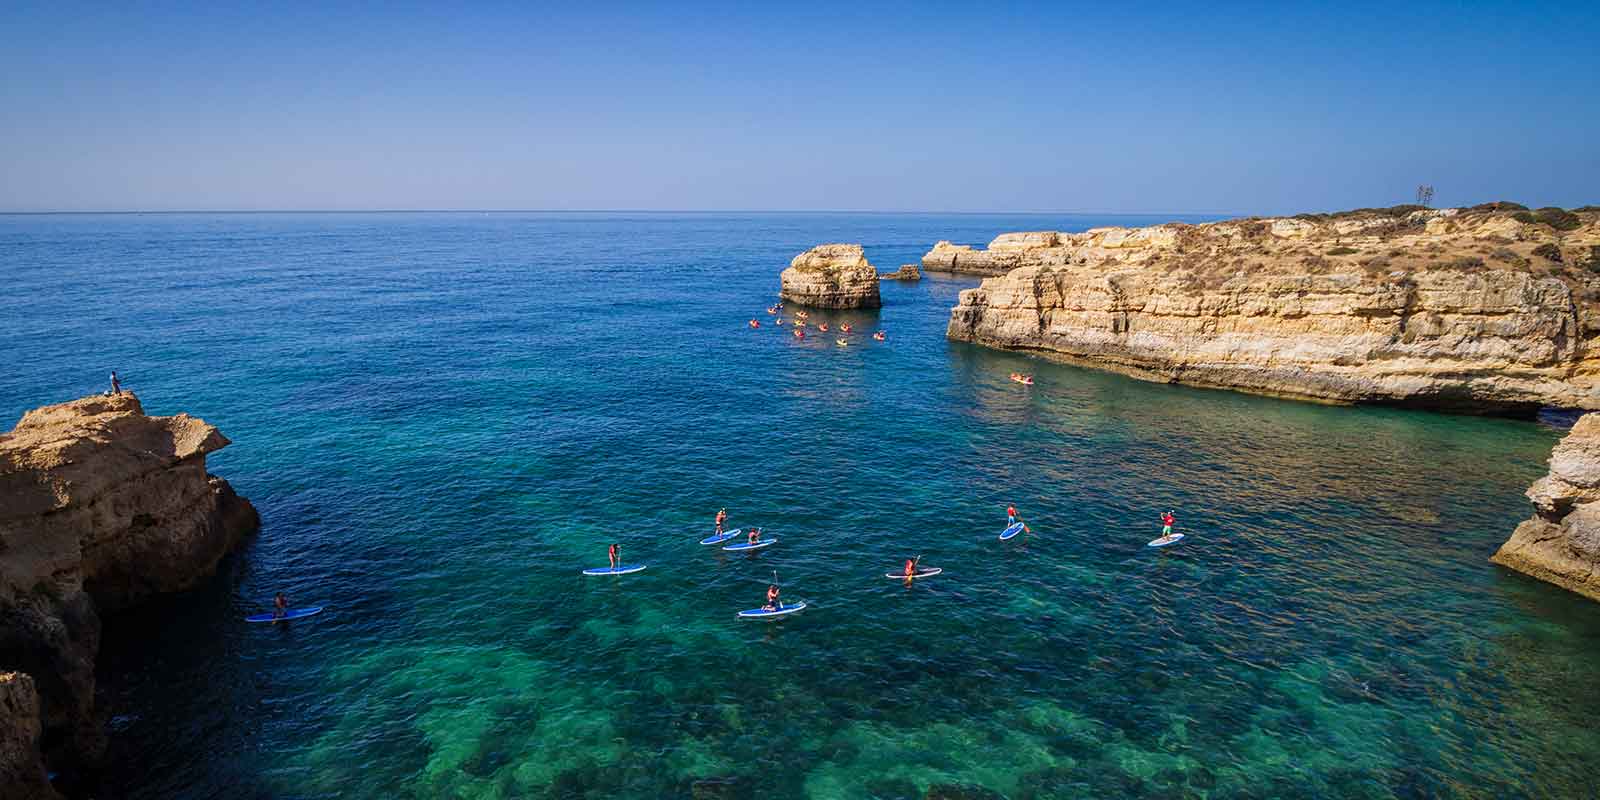 Group of paddleboarders in a secluded bay on the Atlantic coast in the Algarve, Portugal